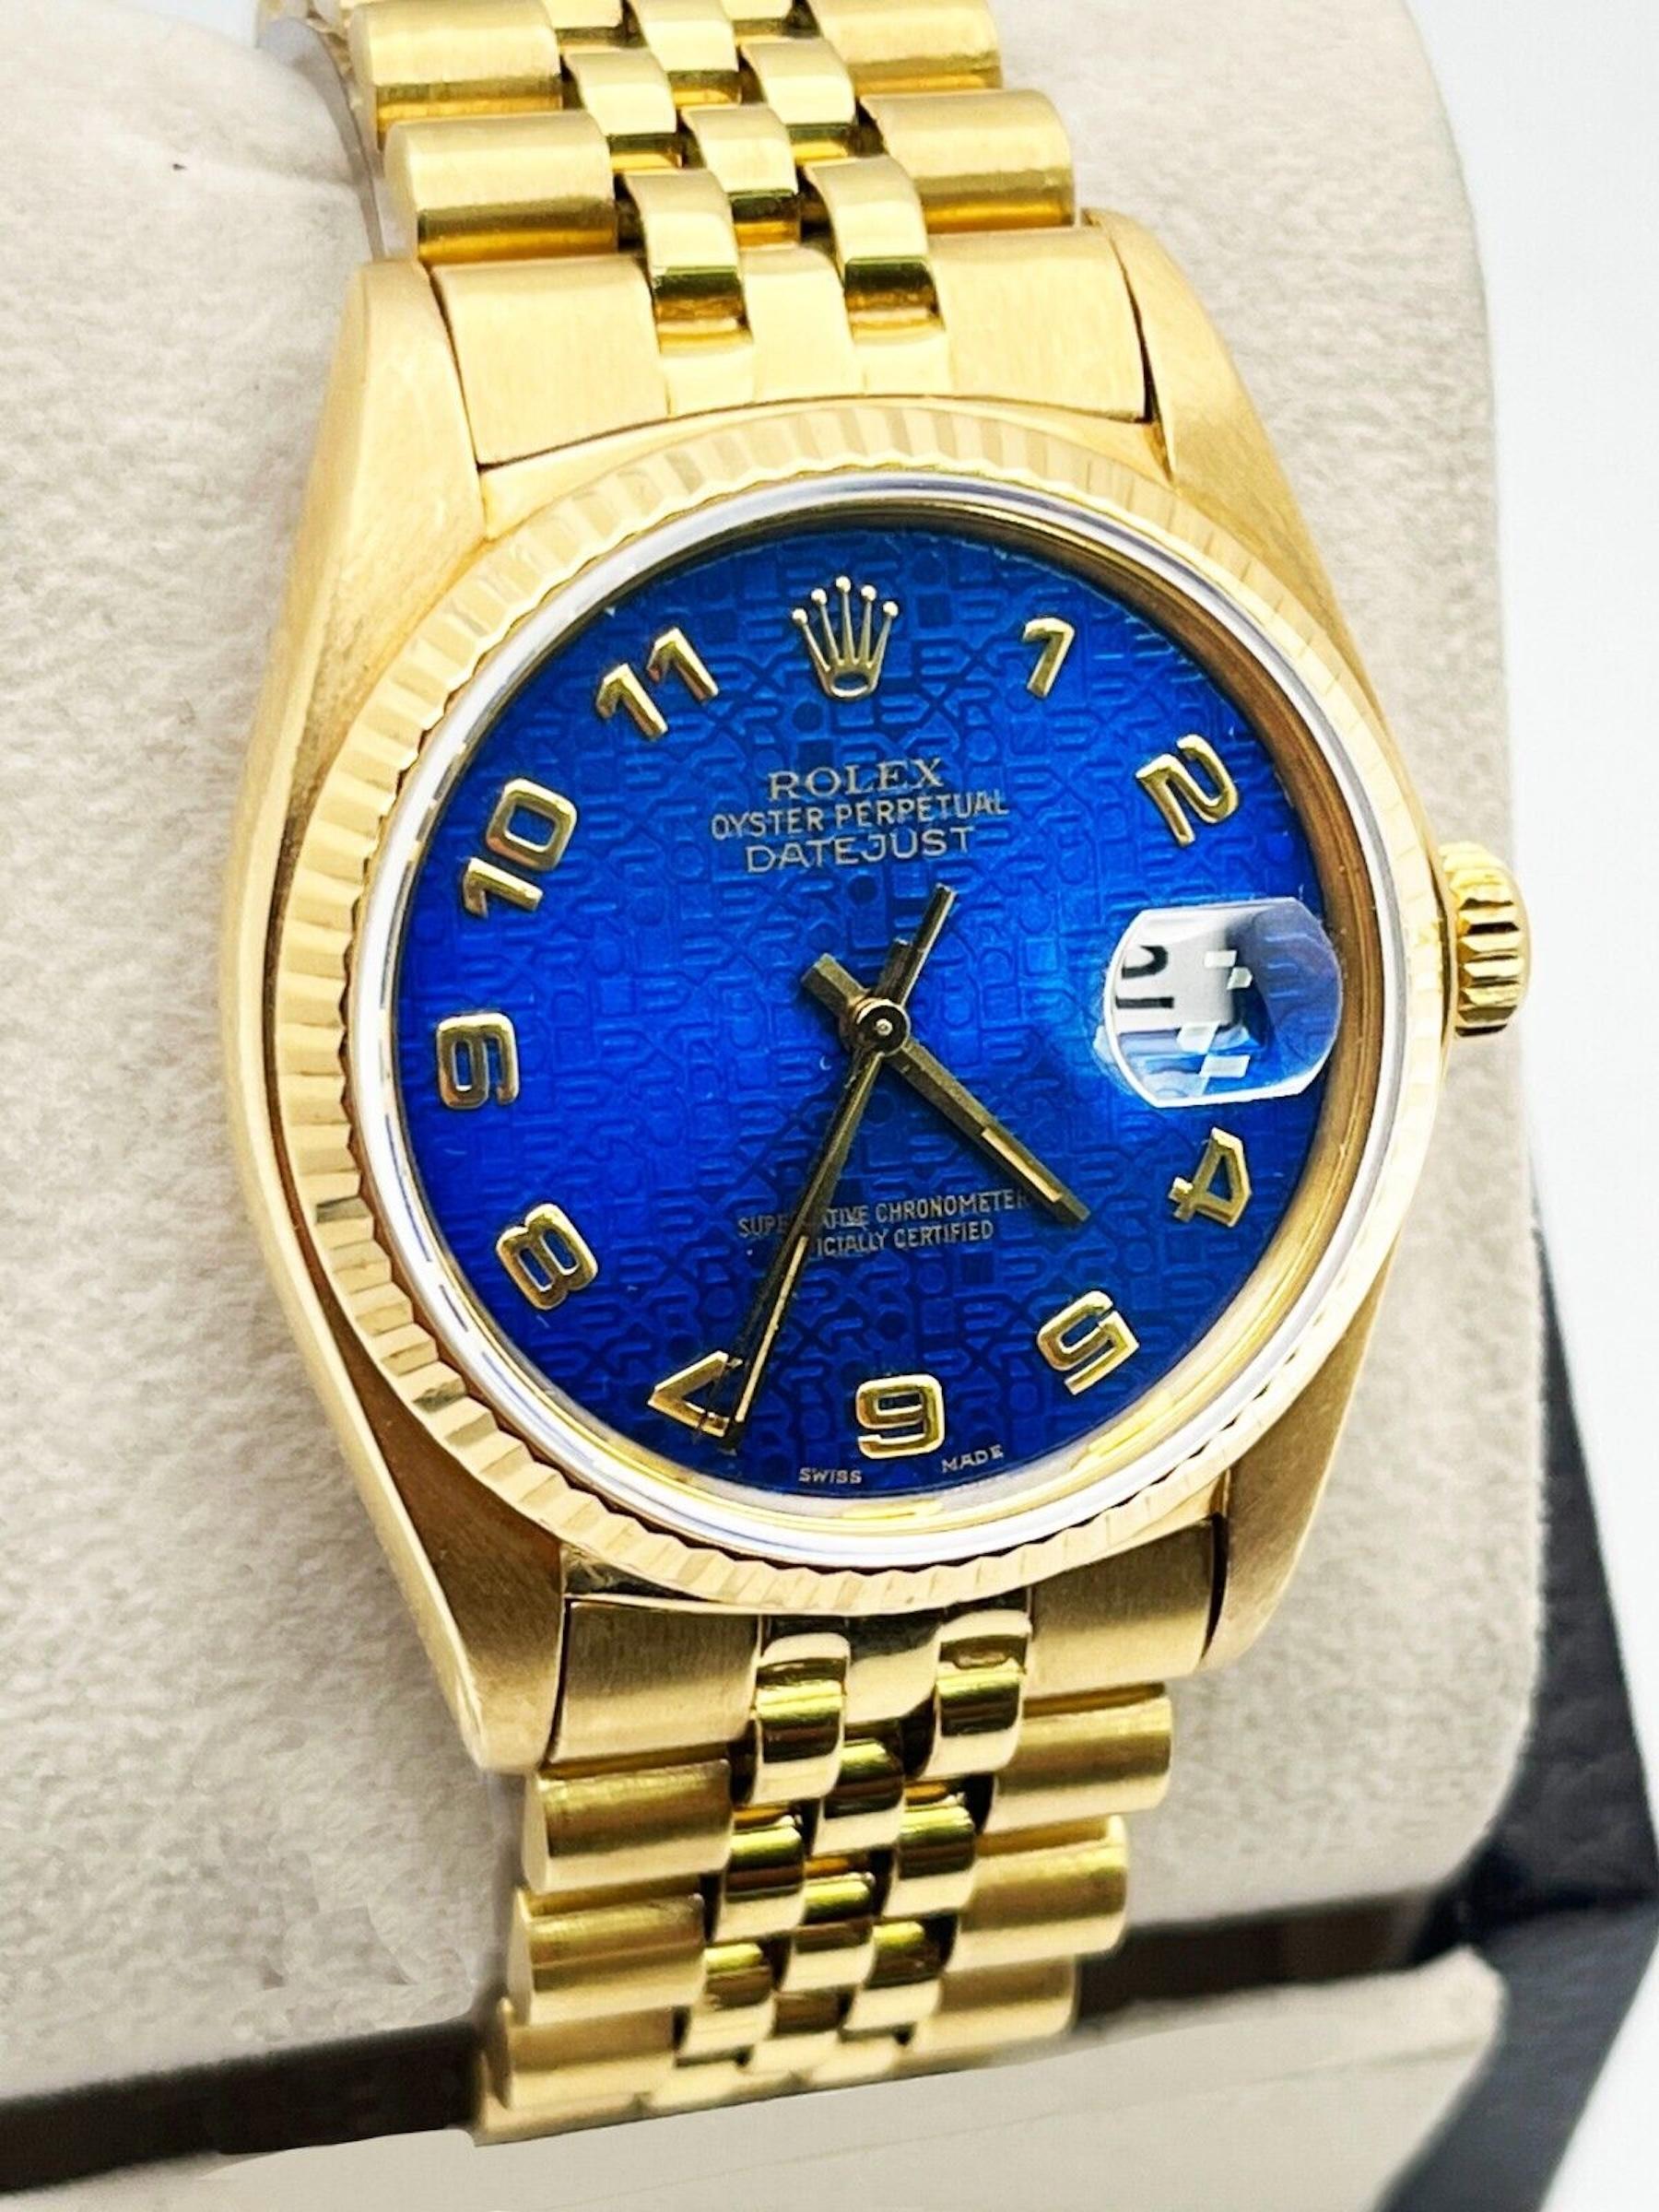 Style Number: 16018



Serial: 5633***



Year: 1978

 

Model: Datejust 

 

Case Material: 18K Yellow Gold

 

Band: 18K Yellow Gold

 

Bezel: 18K Yellow Gold 

 

Dial: Factory Blue Jubilee Dial 

 

Face: Sapphire Crystal 

 

Case Size: 36mm